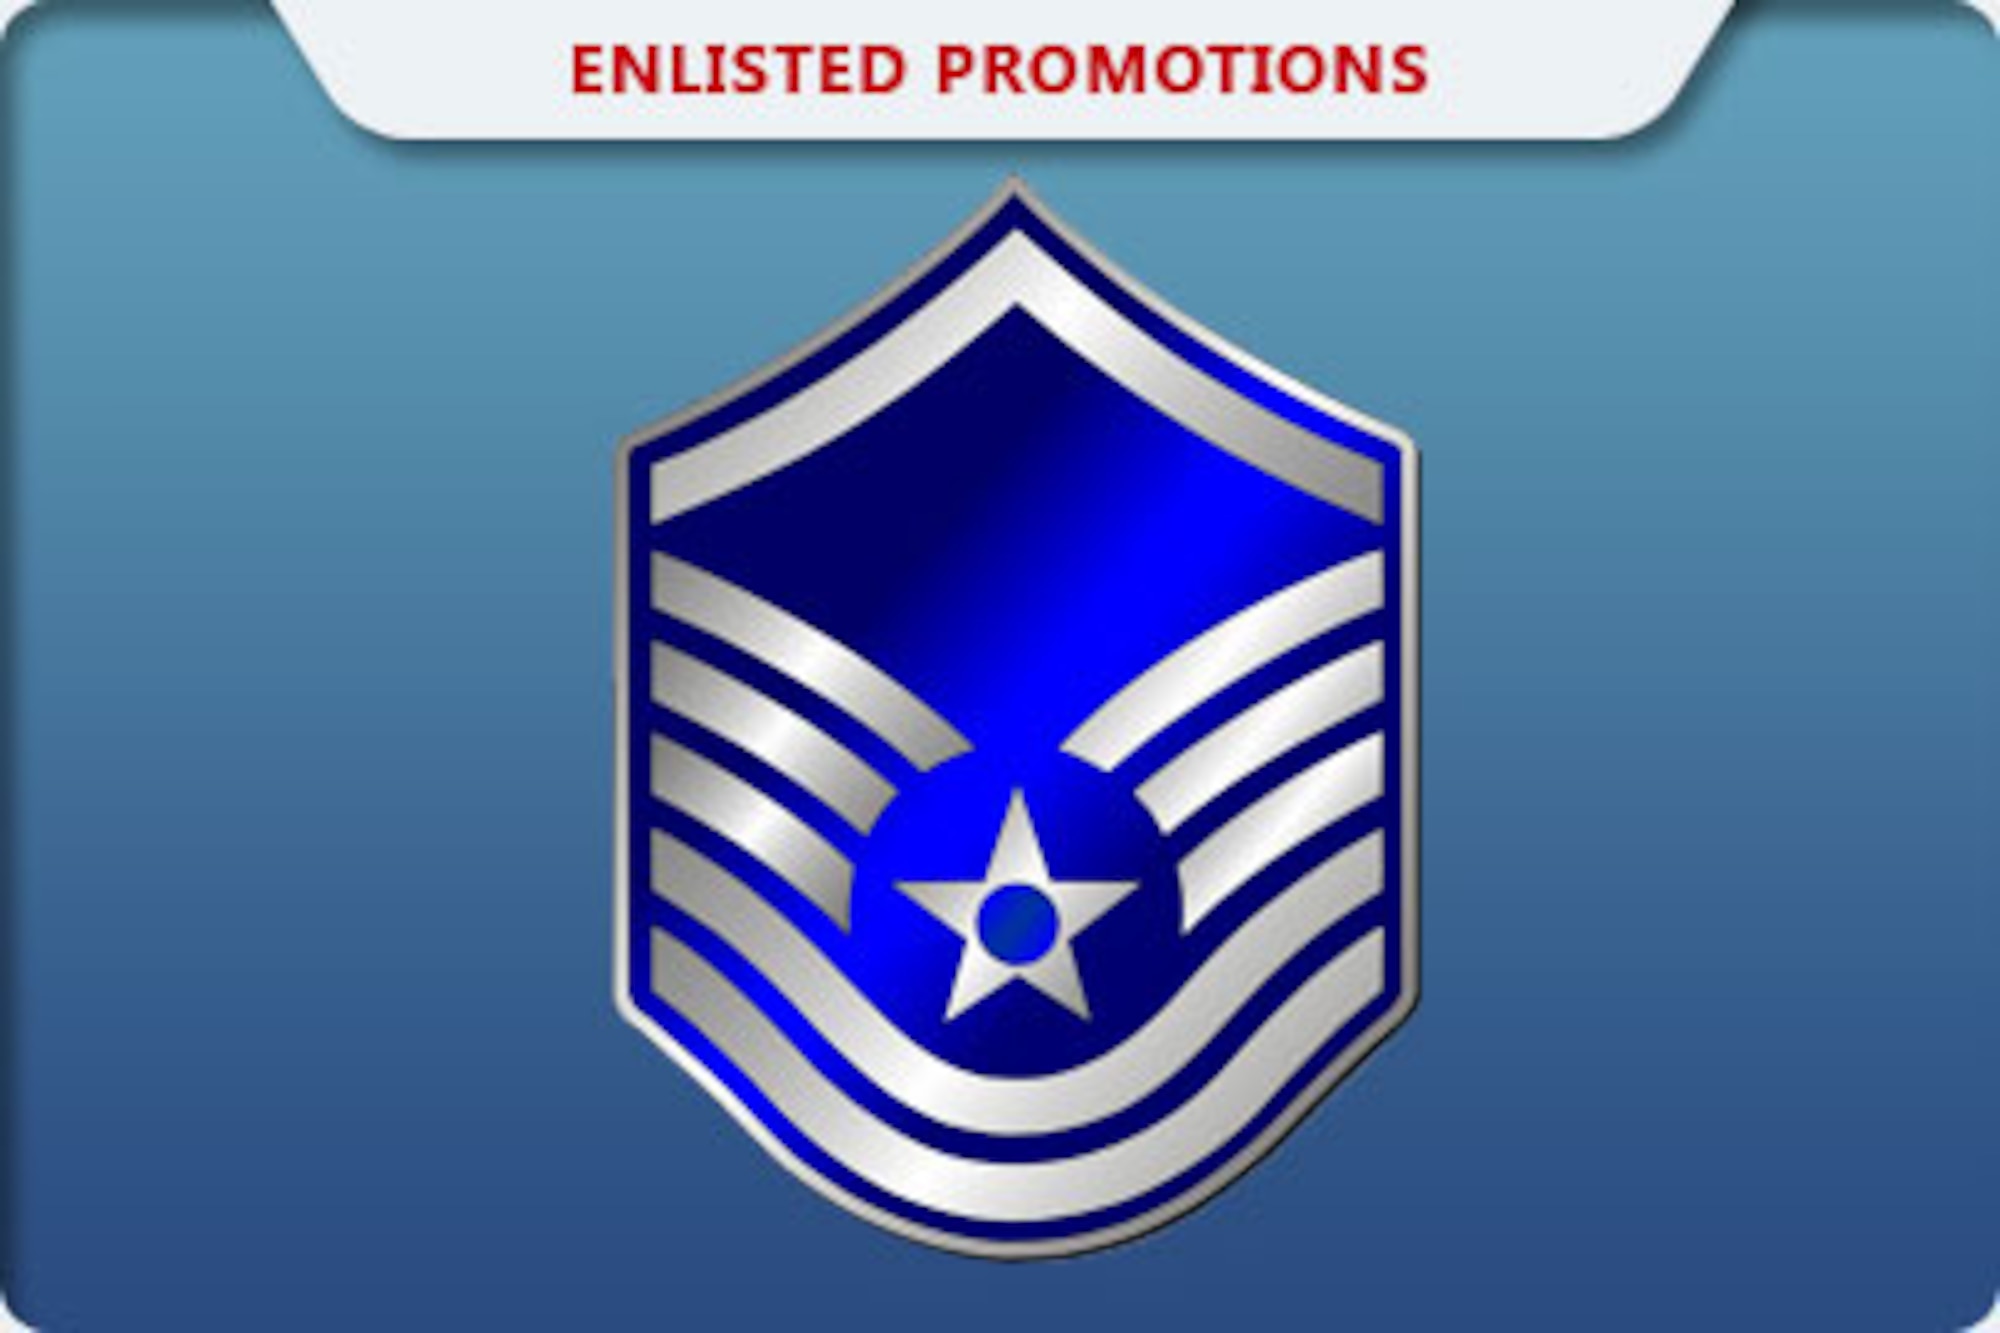 The master sergeant promotion list is now available on the Air Force Personnel Center's website and Air Force personnel services website under enlisted promotions. Airmen can also access their Weighed Airman Promotion System score notices at the same time on the Virtual Military Personnel Flight application and Air Force Portal.